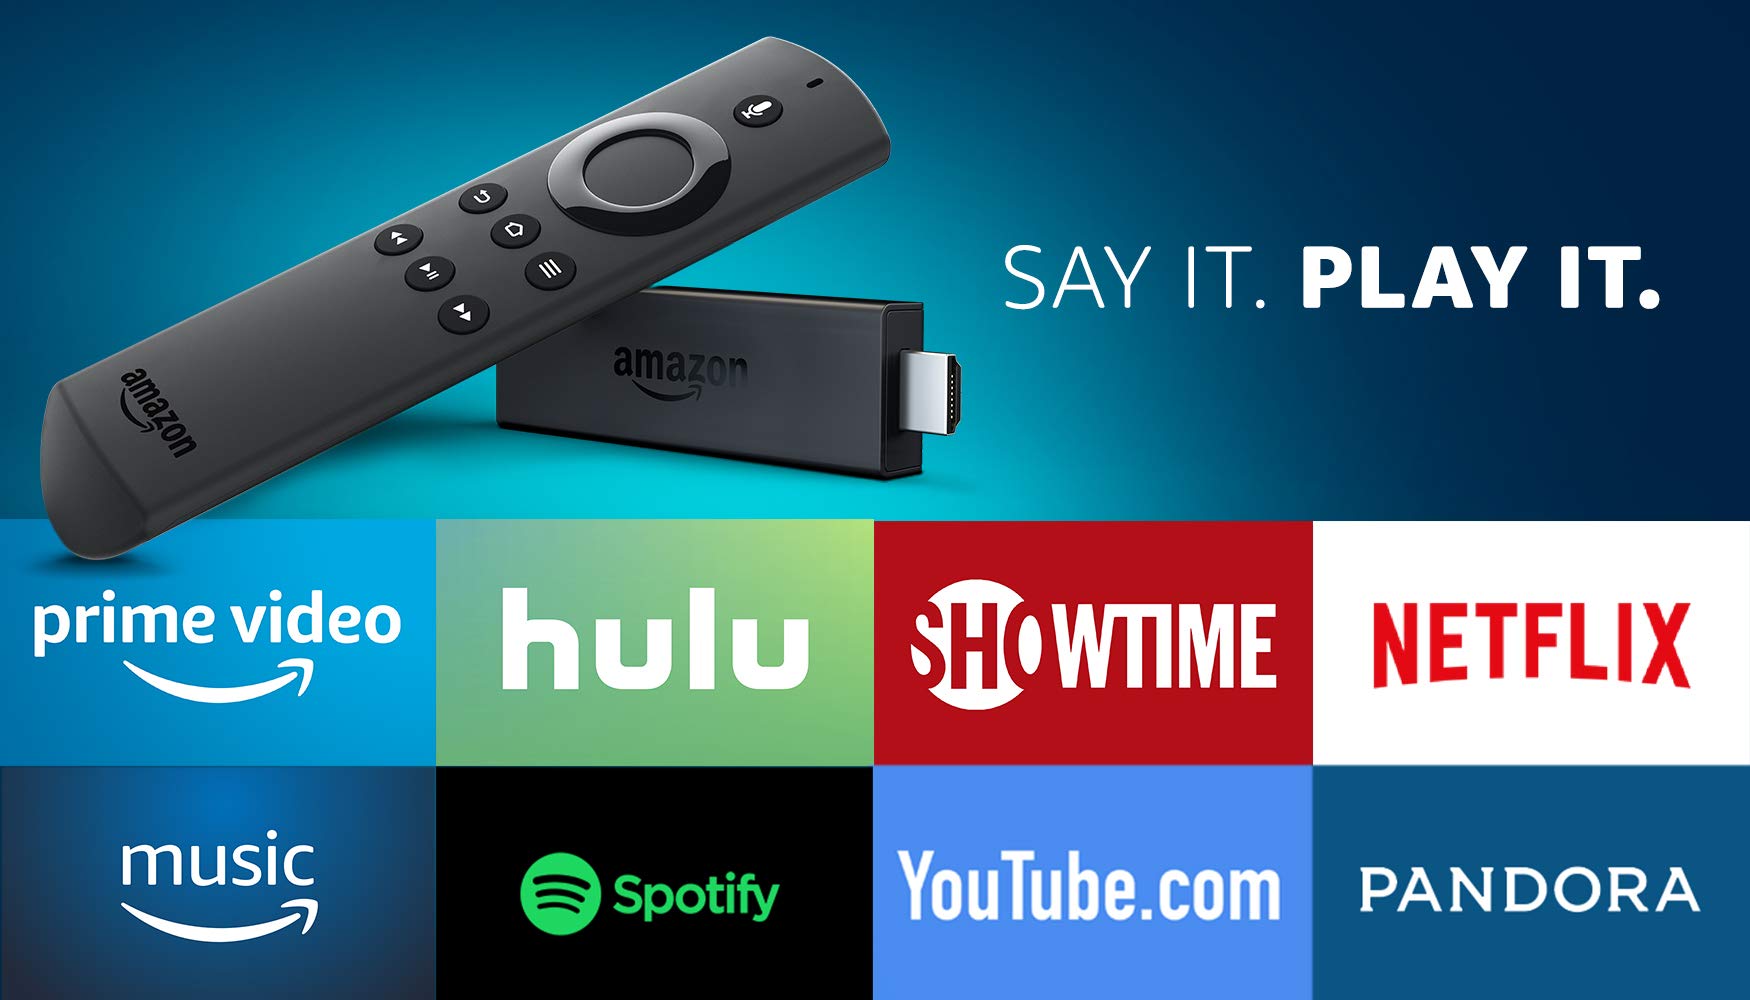 Fire TV Stick with Alexa Voice Remote, streaming media player - Previous Generation